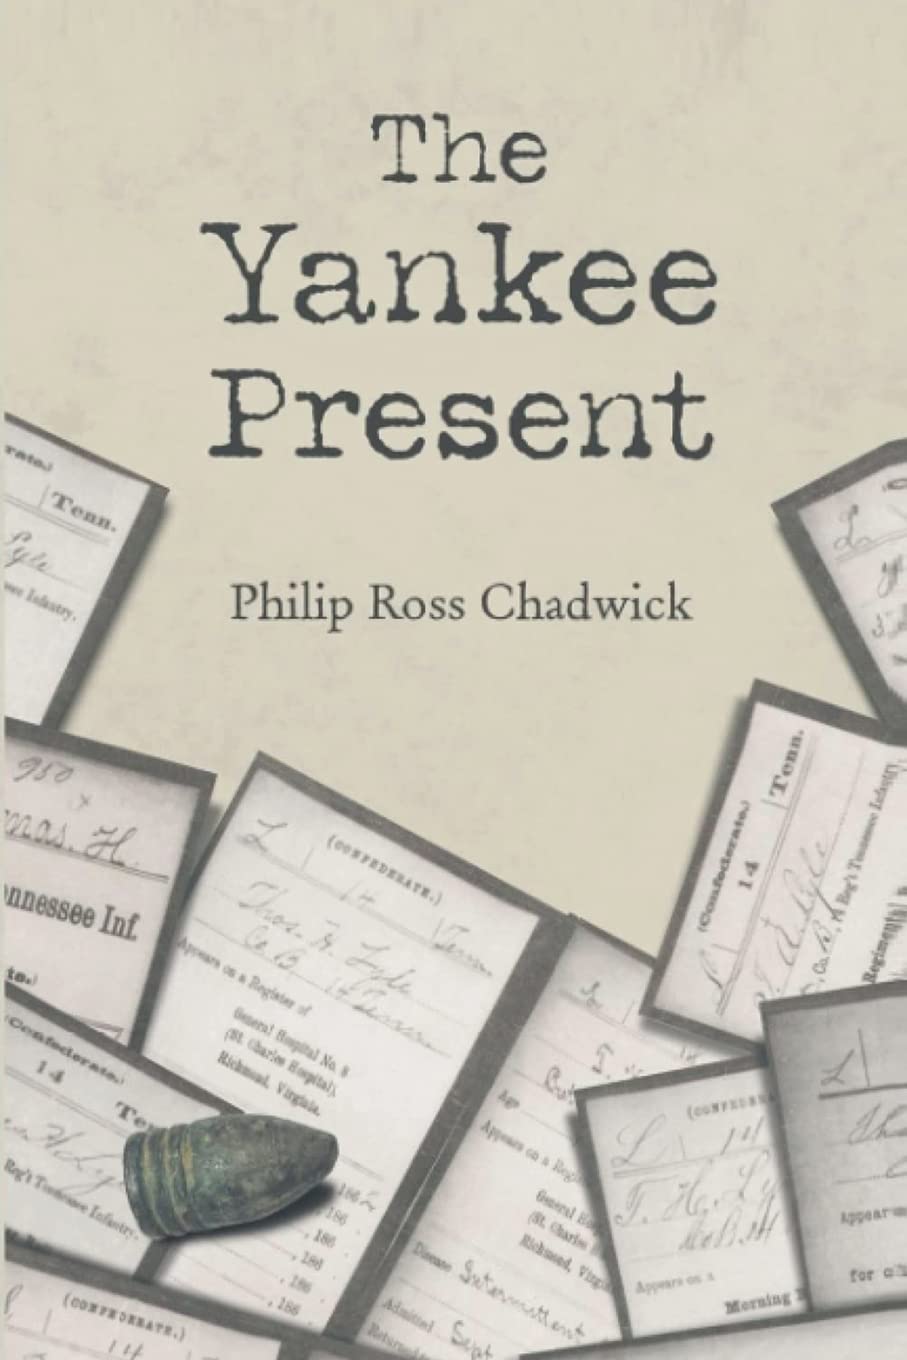 Author’s Tranquility Press Publishes The Yankee Present by Philip Ross Chadwick 1